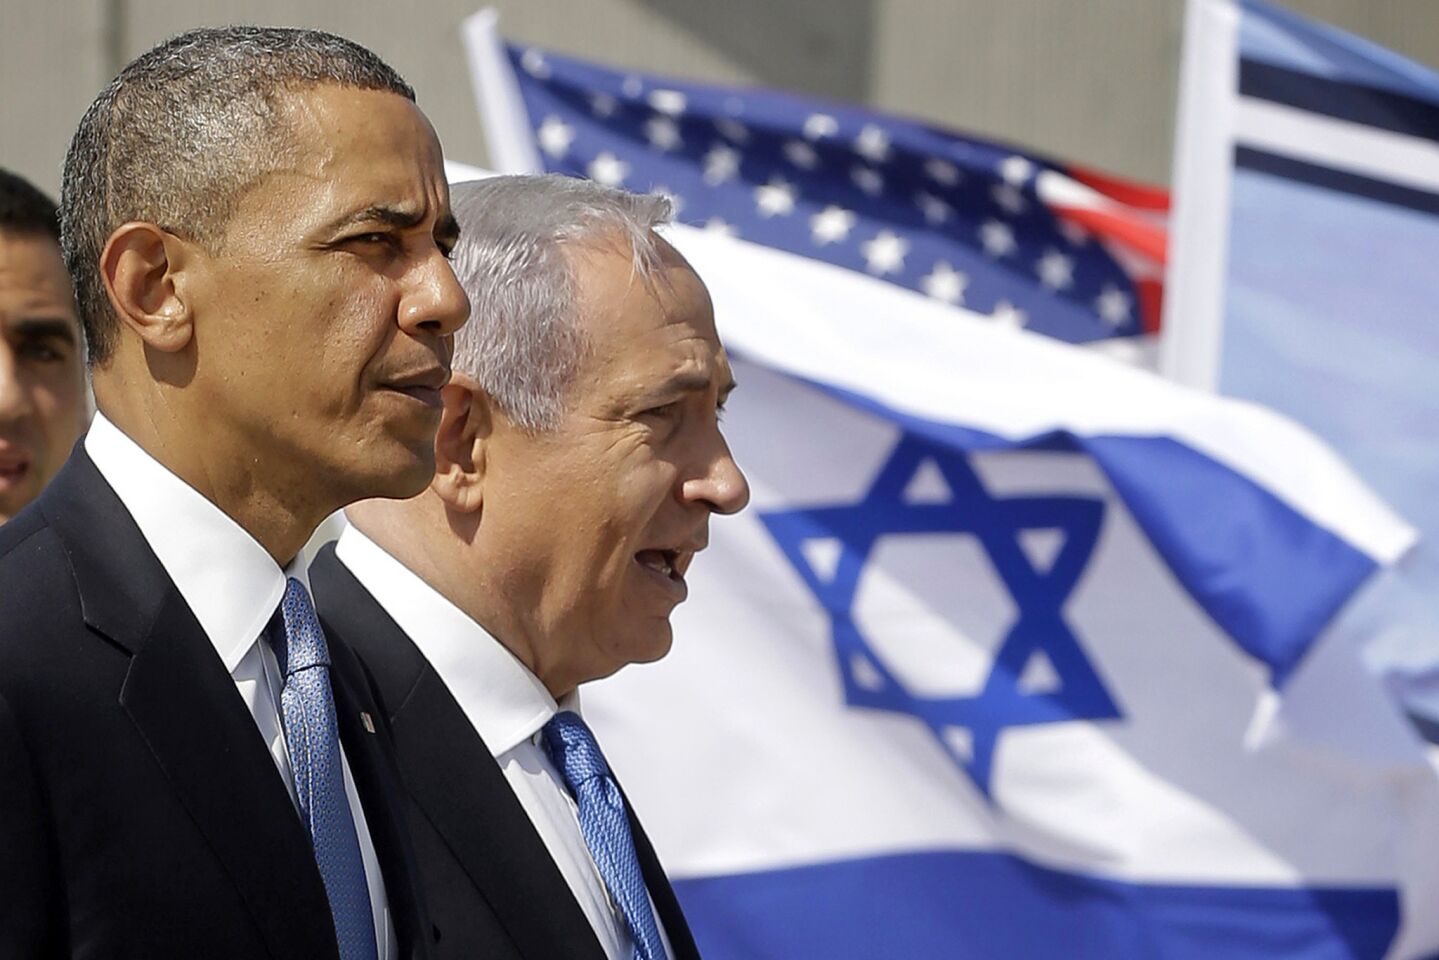 Admittedly, this was more a mistake from years past, but Obama's euphoric reception in Israel just underscores what a fabulous miscalculation it was for him not to visit during his first term, especially when brokering an Israeli-Palestinian peace deal was laid out as a priority from the first days of his administration. We will never know how many of the political headaches with Israeli Prime Minister Benjamin Netanyahu could have been avoided if the Israeli public had a better sense of Obama four years ago. But OK, better late than never. Moving on. MORE YEAR IN REVIEW: Politicians' lamest apologies in 2013 12 political photos that made us look twice Kindness in the world of politics? 7 uplifting examples from 2013